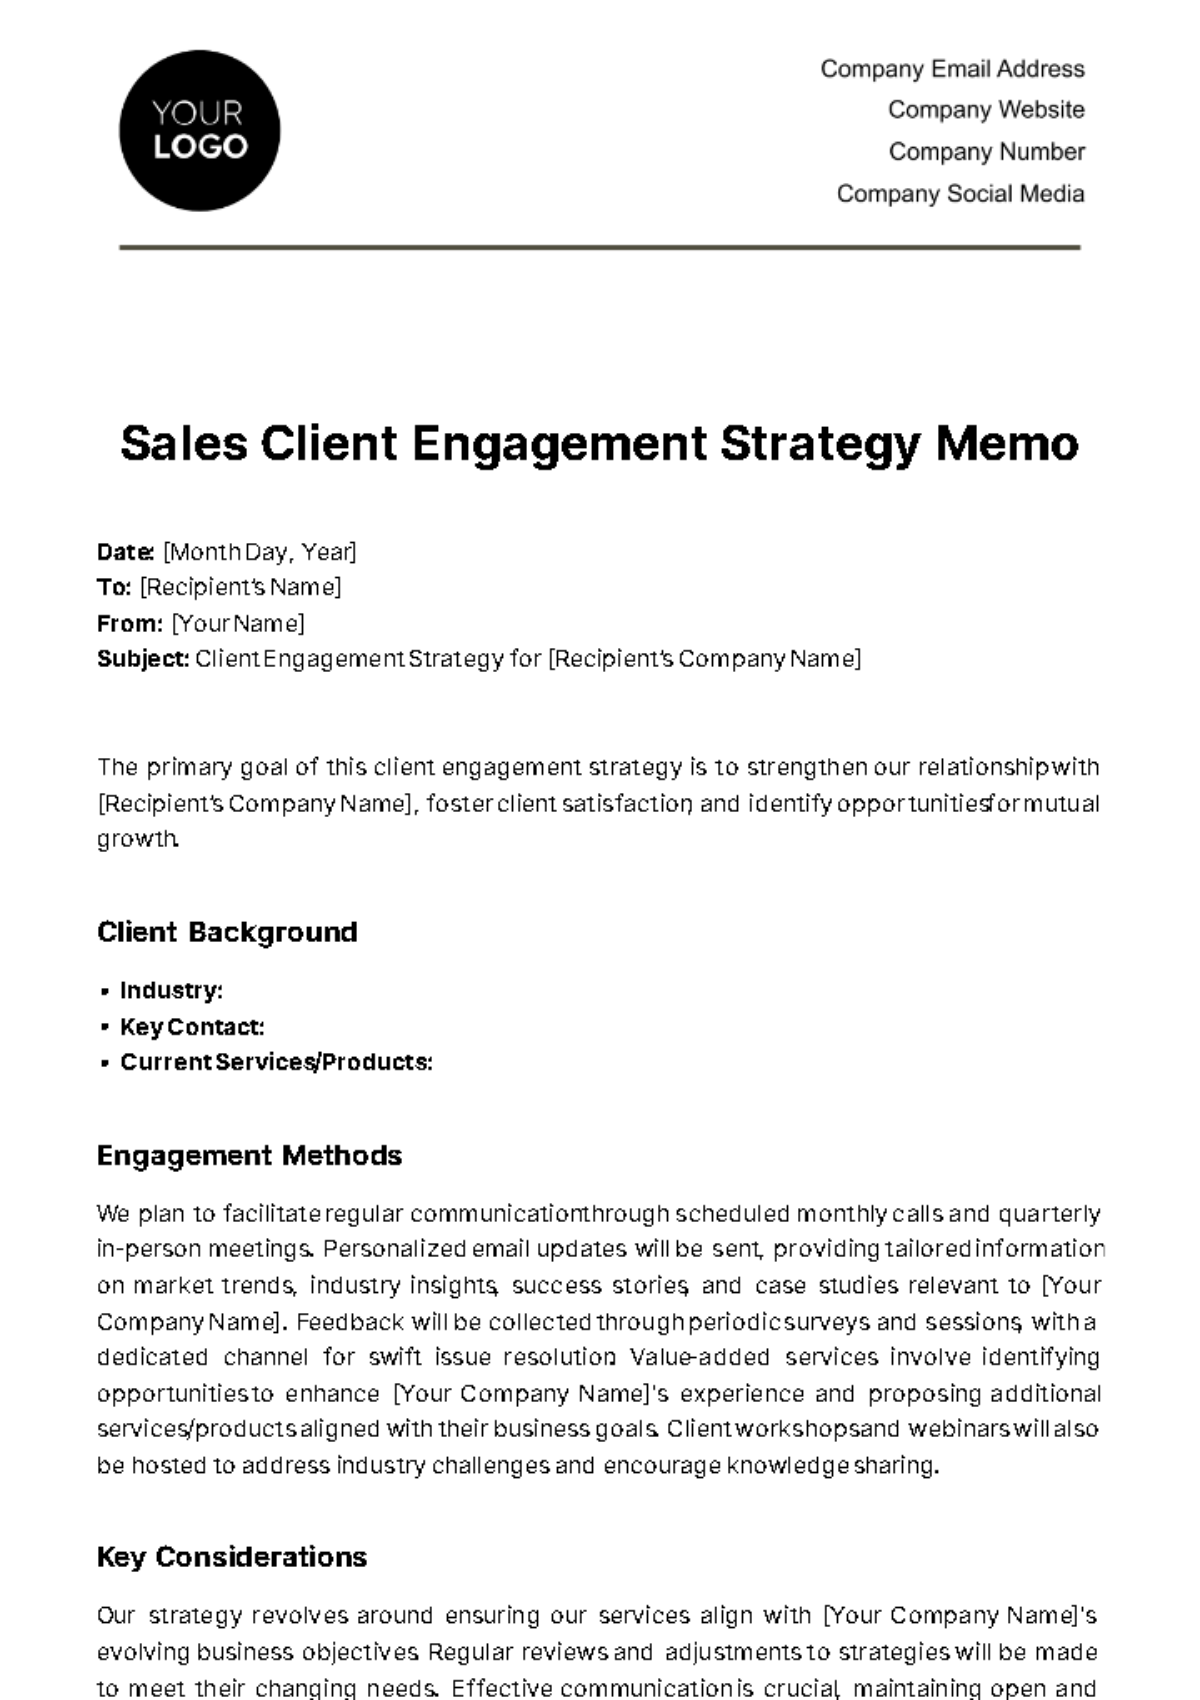 Free Sales Client Engagement Strategy Memo Template